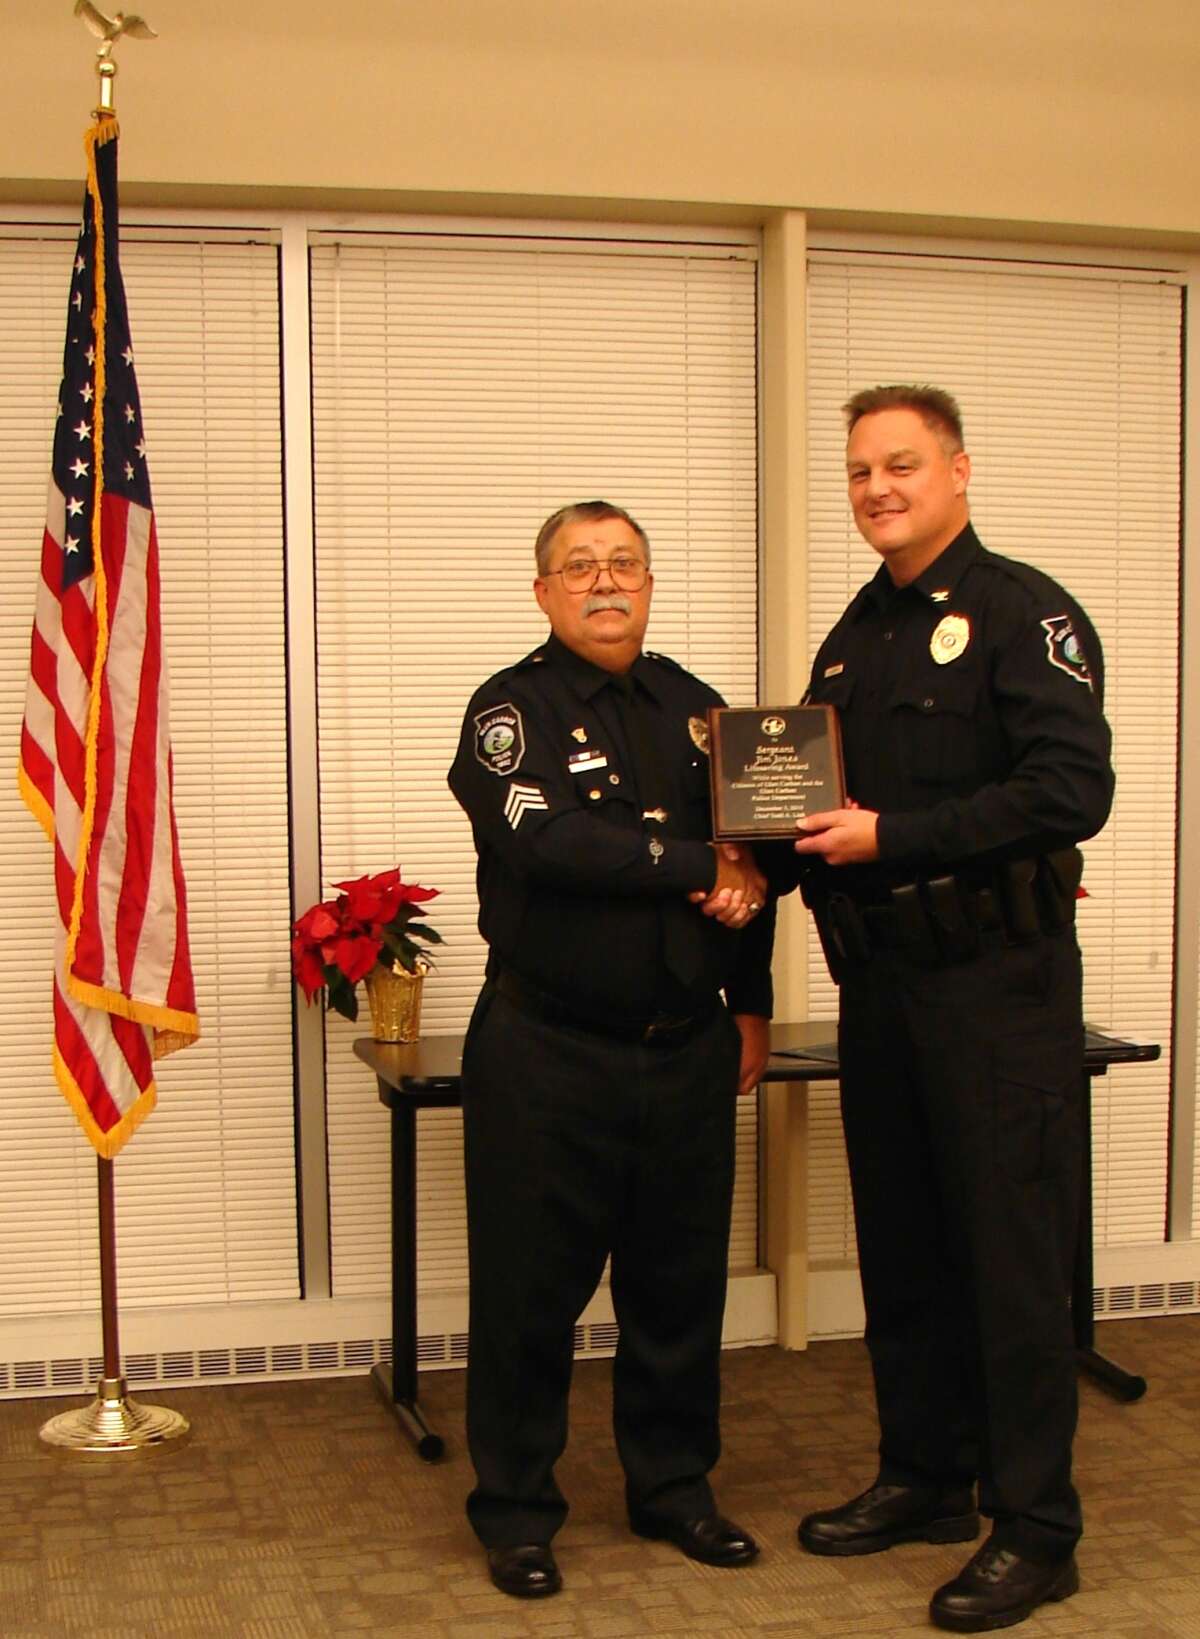 Sgt. James Jones is honored for his 40 years of service by Glen Carbon Police Chief, Todd Link. Jones is a familiar sight around town on his Police Motorcycle.